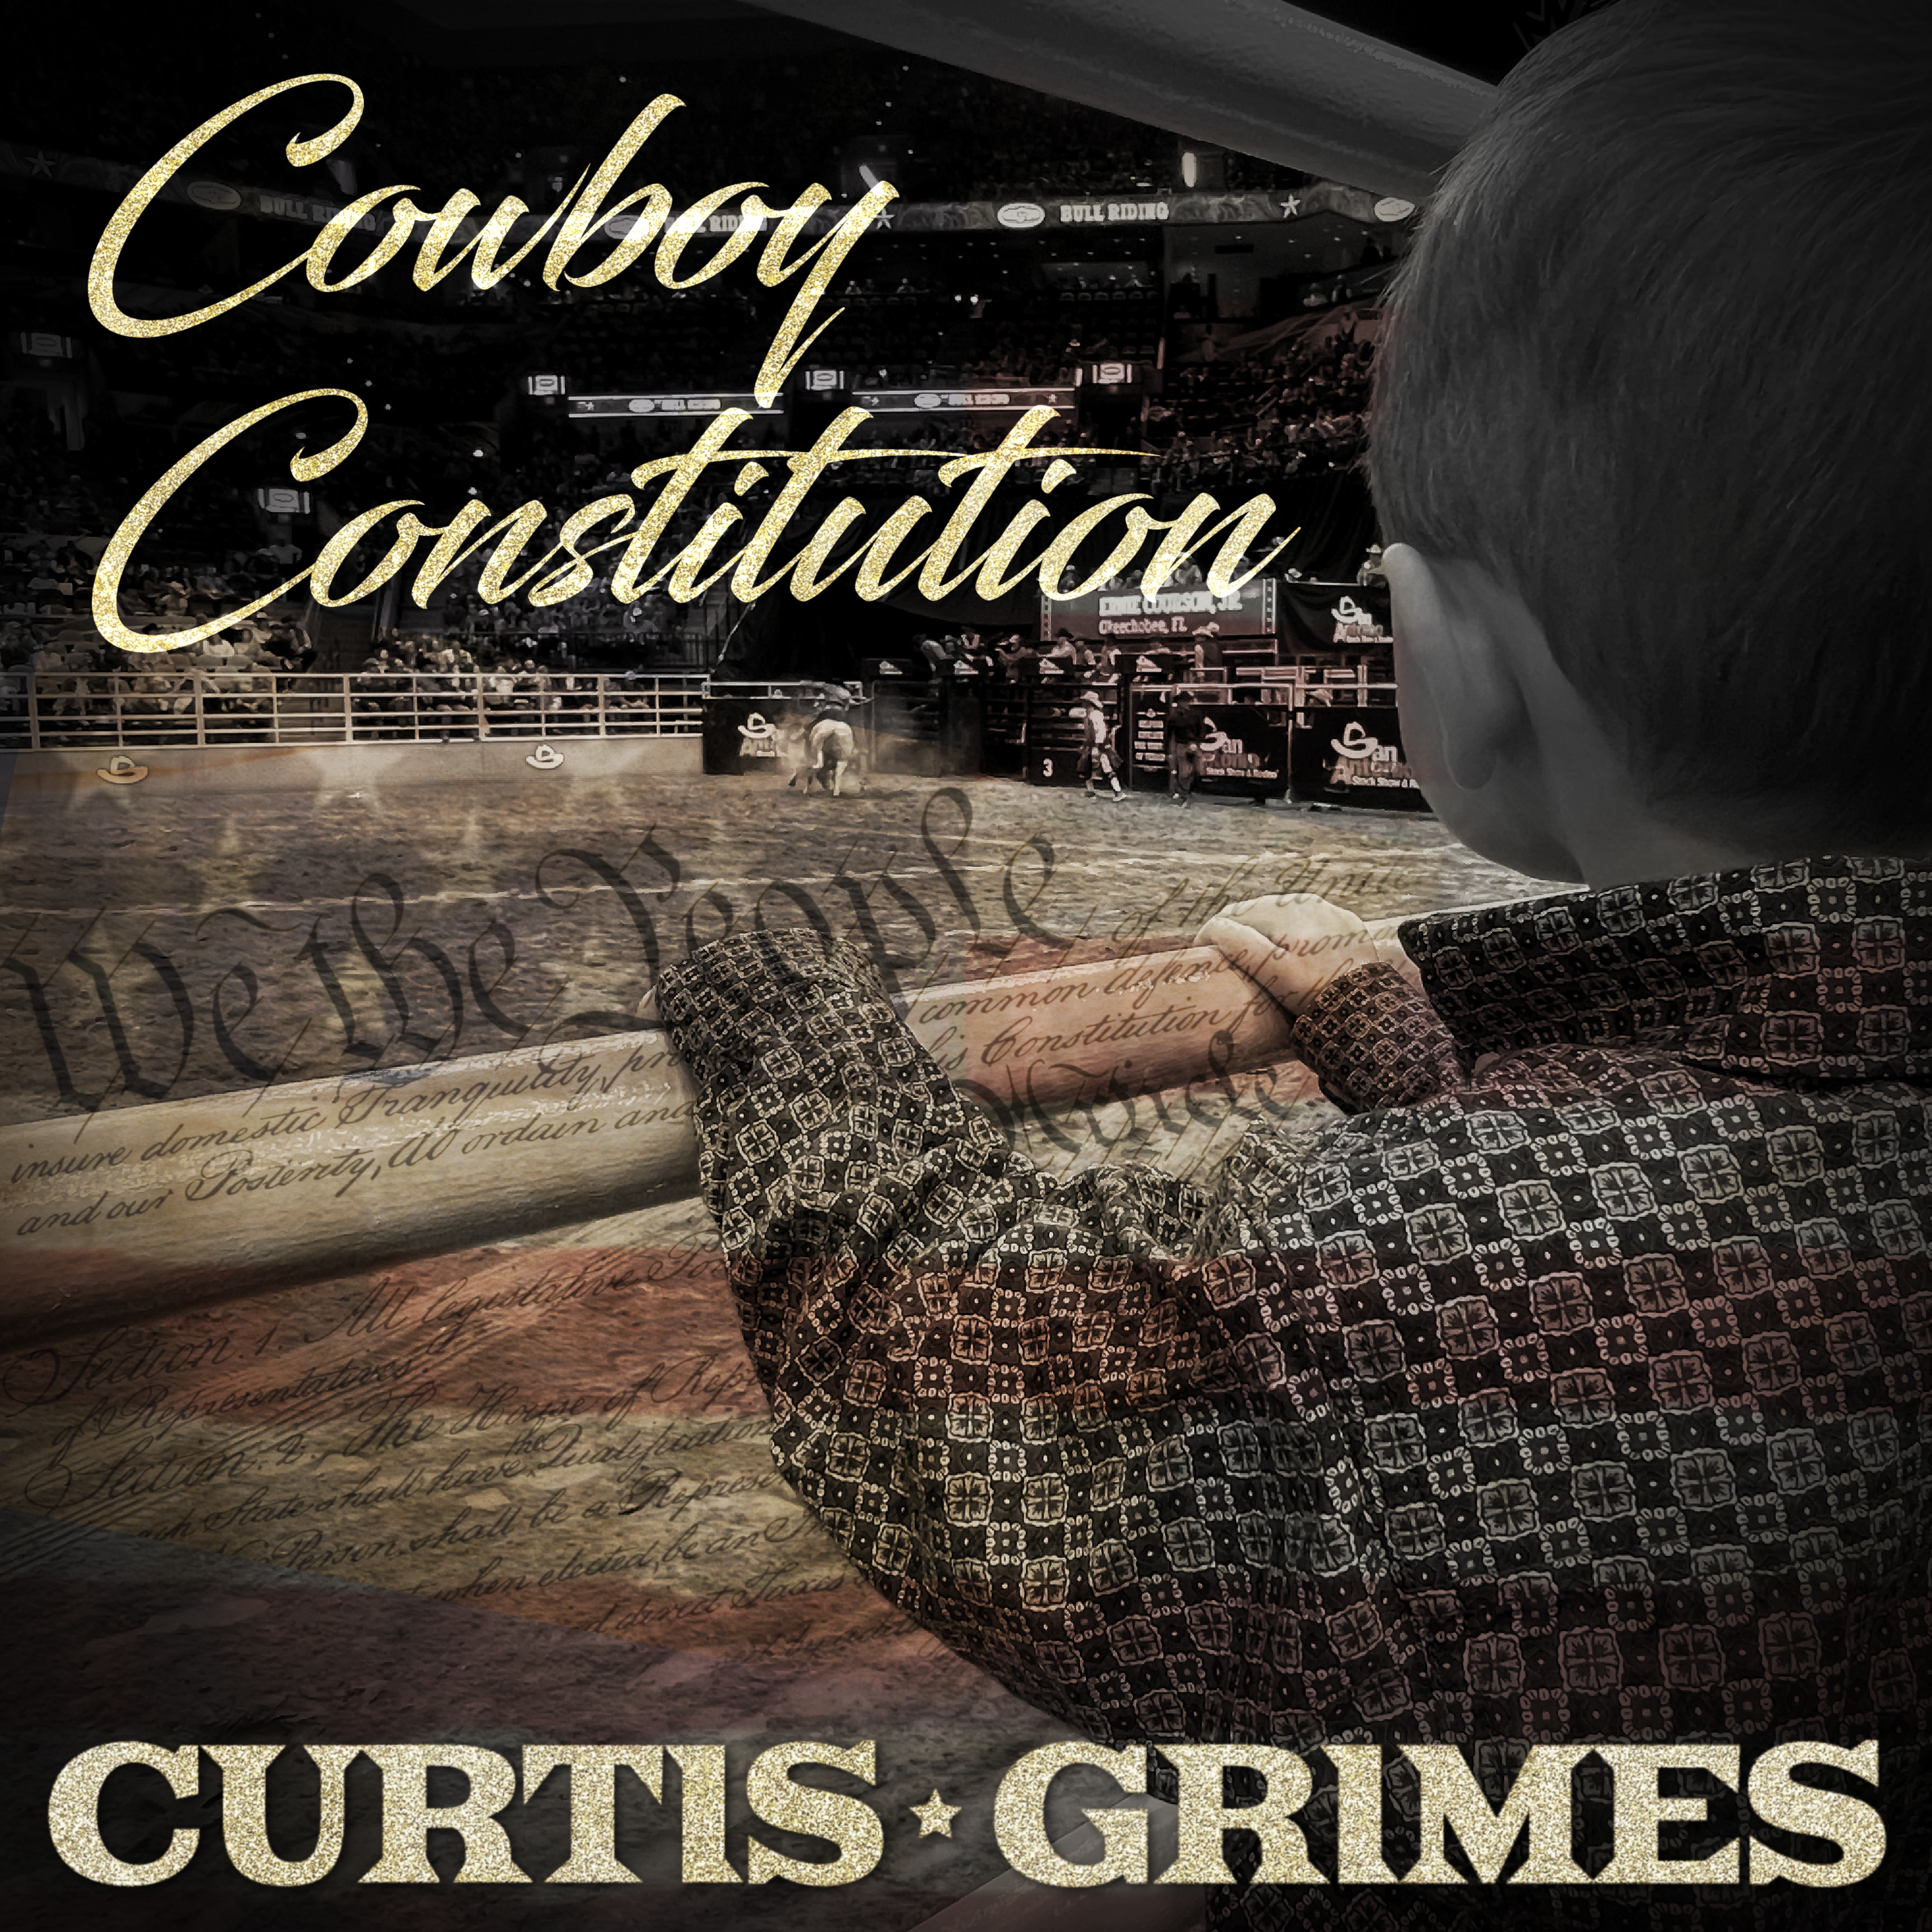 Art for Cowboy Constitution by Curtis Grimes